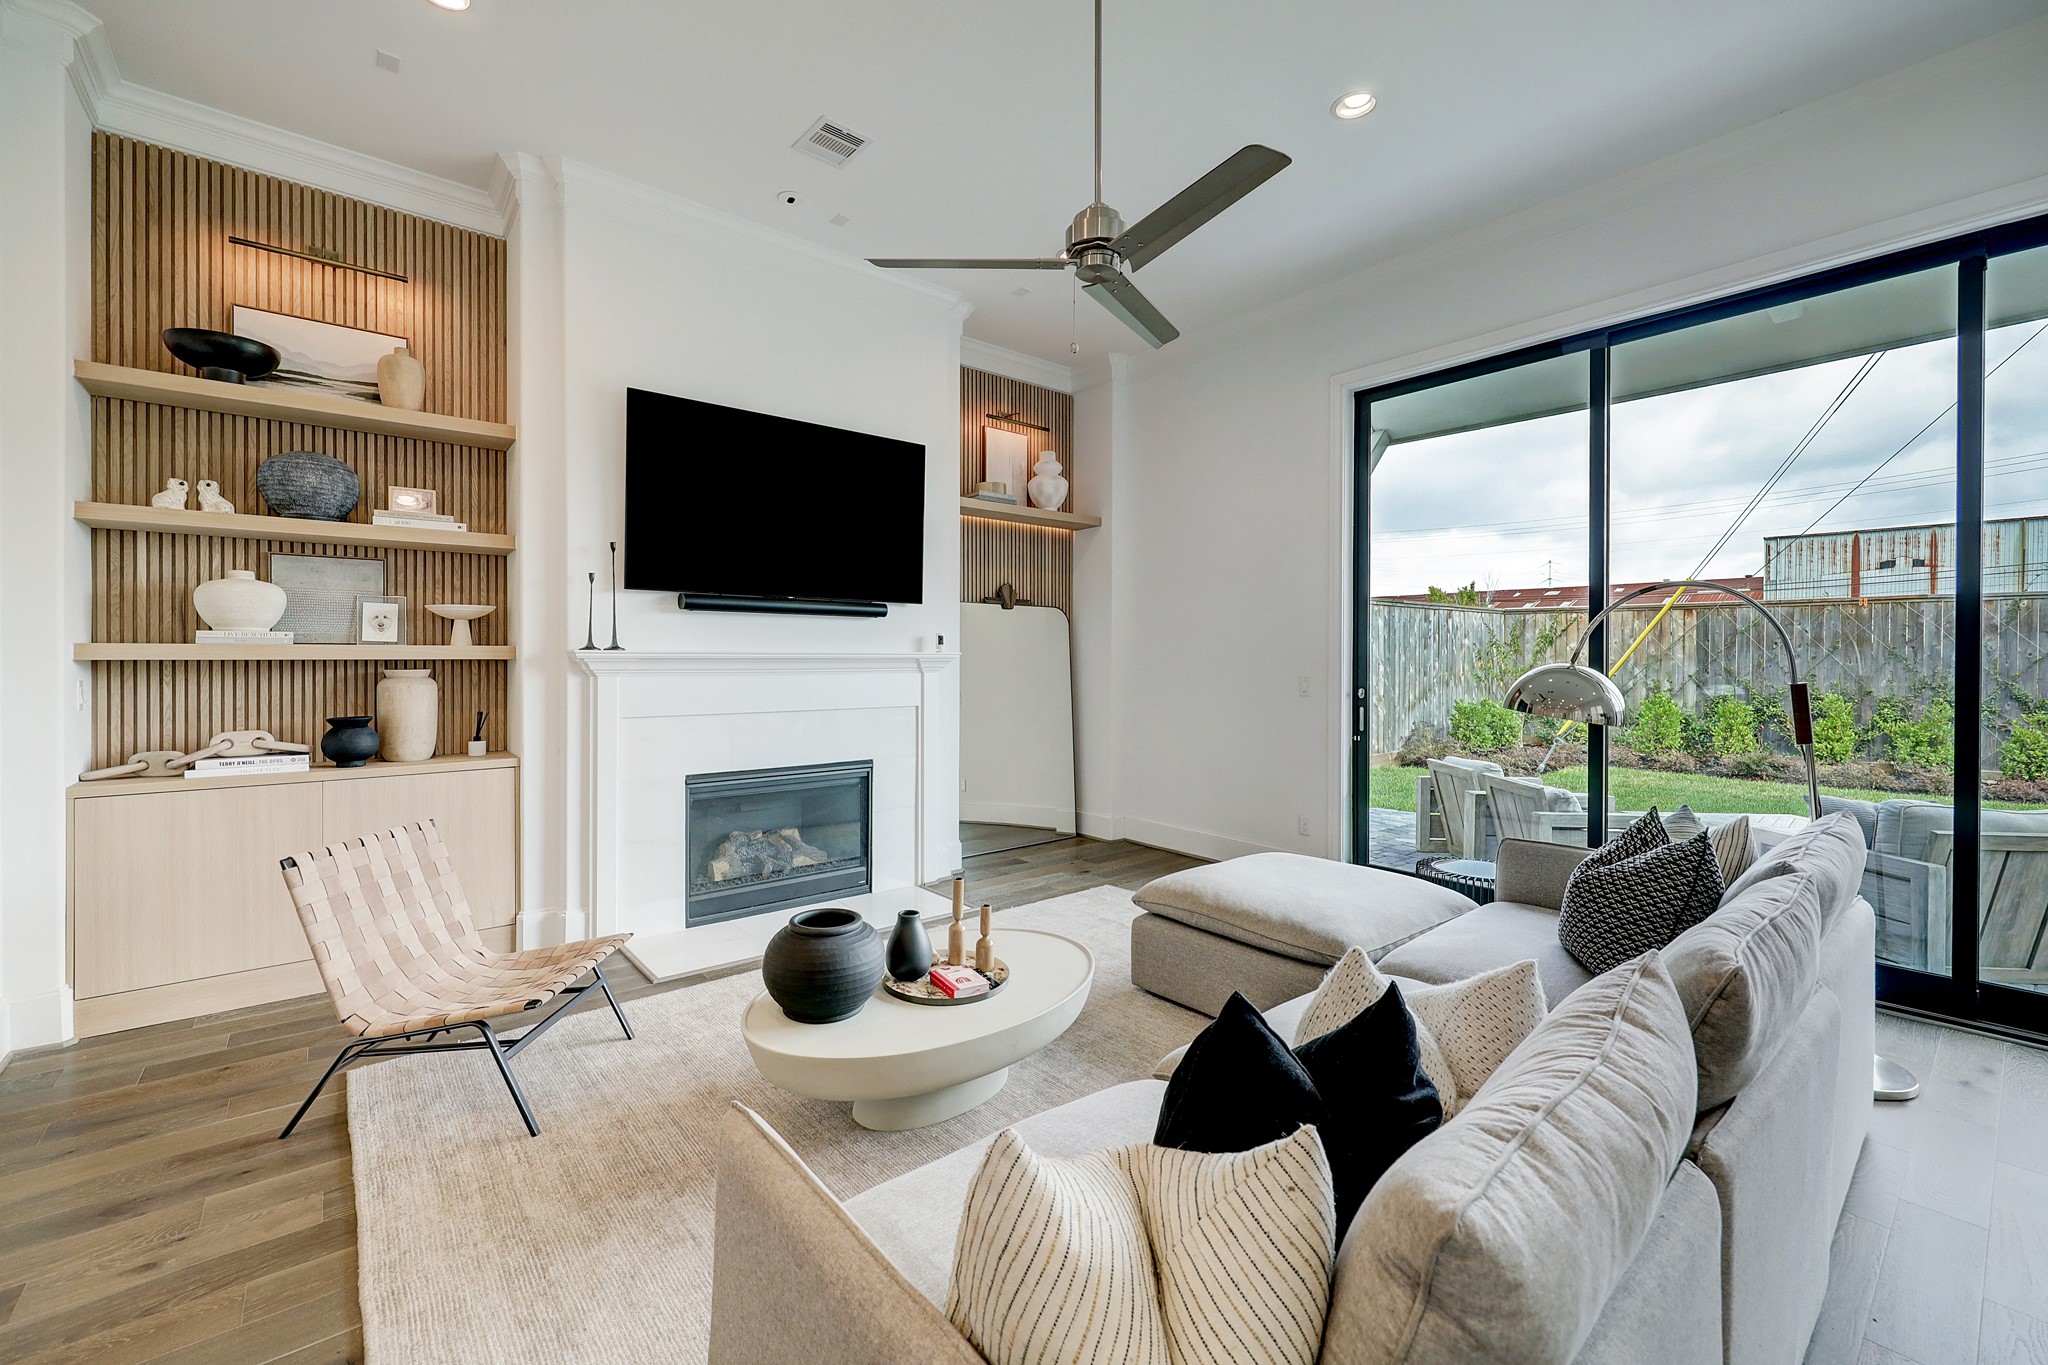 The spacious living room features a fireplace, custom built-ins and sliding glass doors.